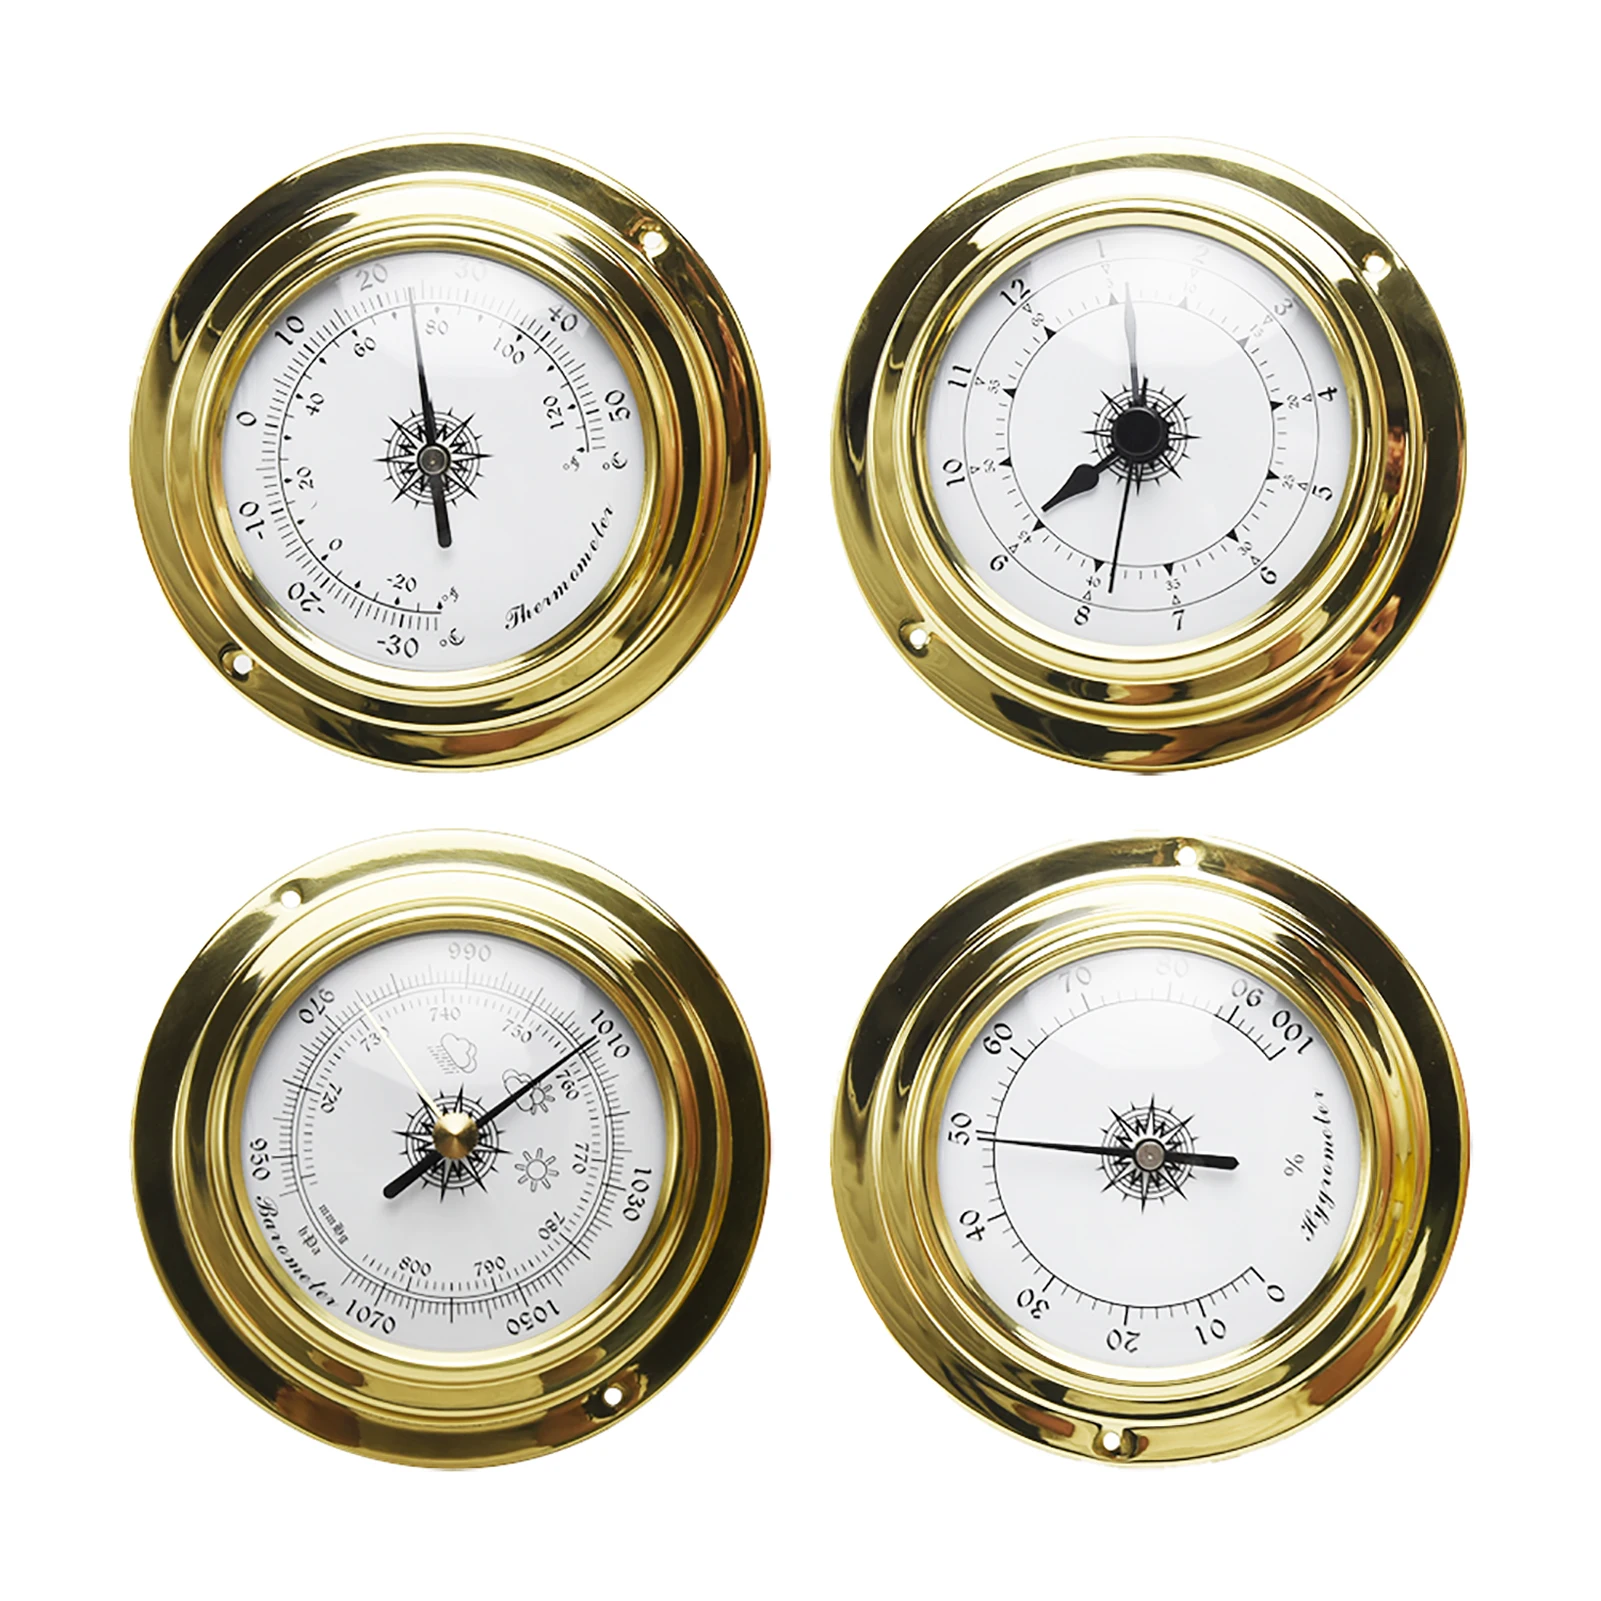 

4pcs 98mm Barometer Clock Kit Mini Meter Portable Marine Thermometer Hygrometer Weather Station Set Accurate Wall Mounted Boat